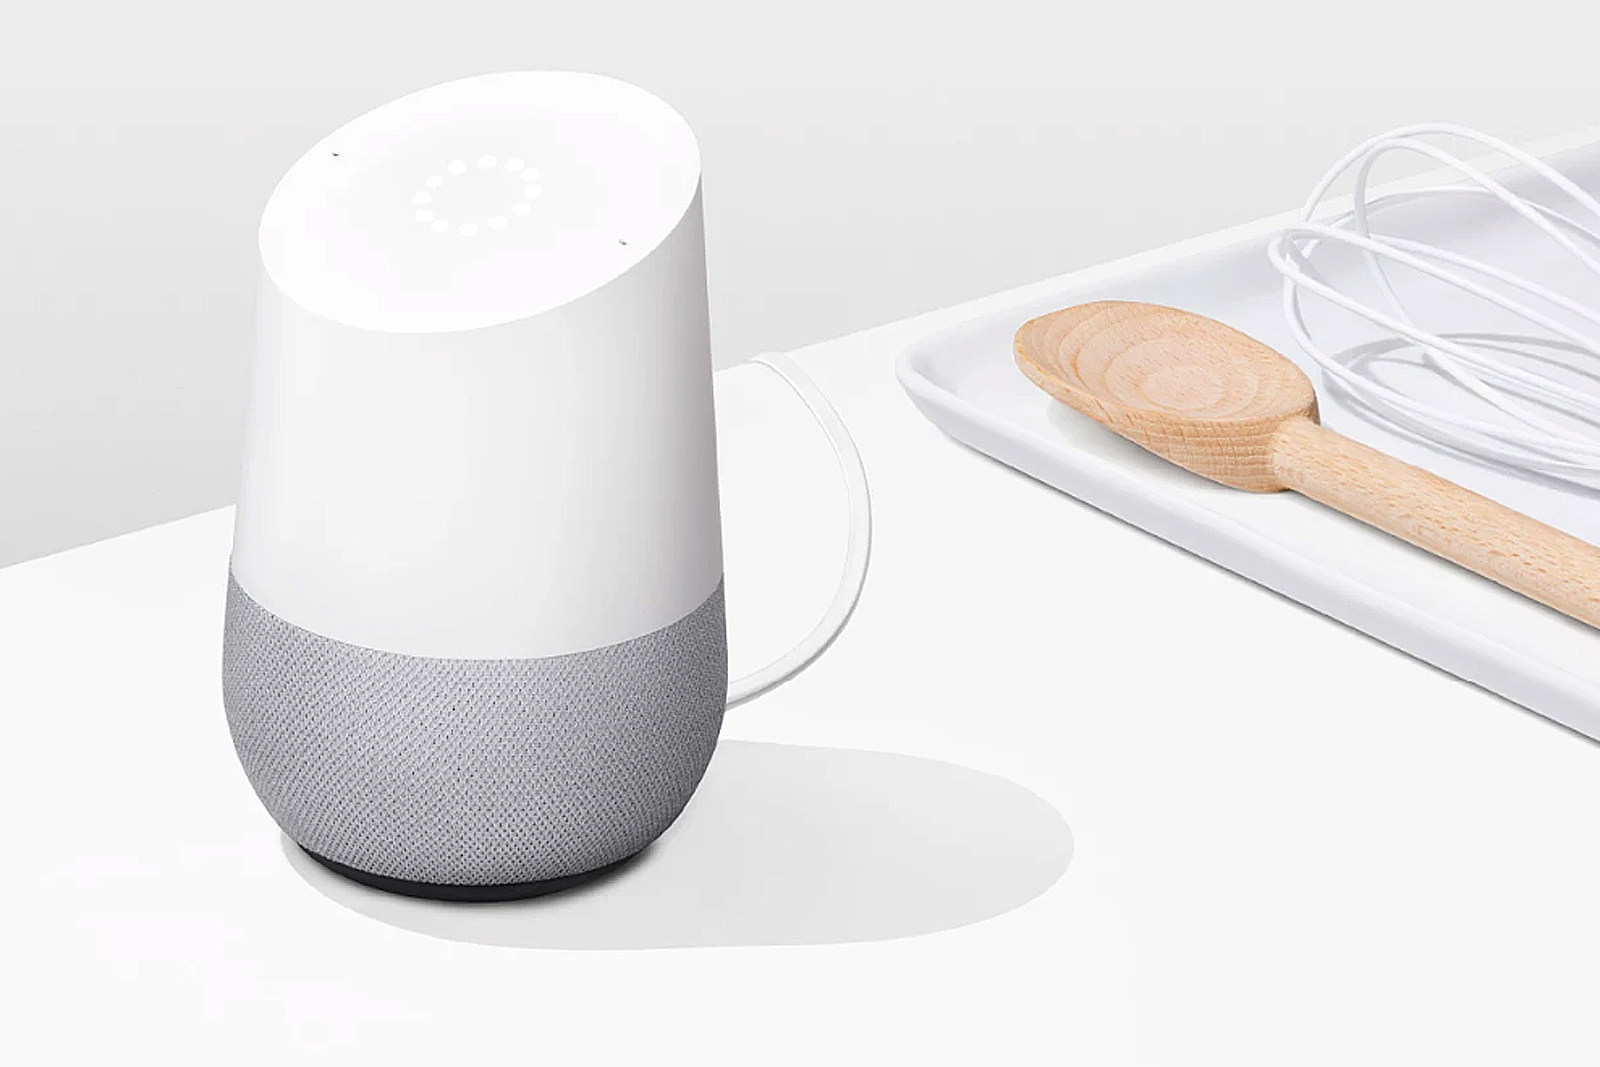 How Do You Listen to The Wolf on Google Home